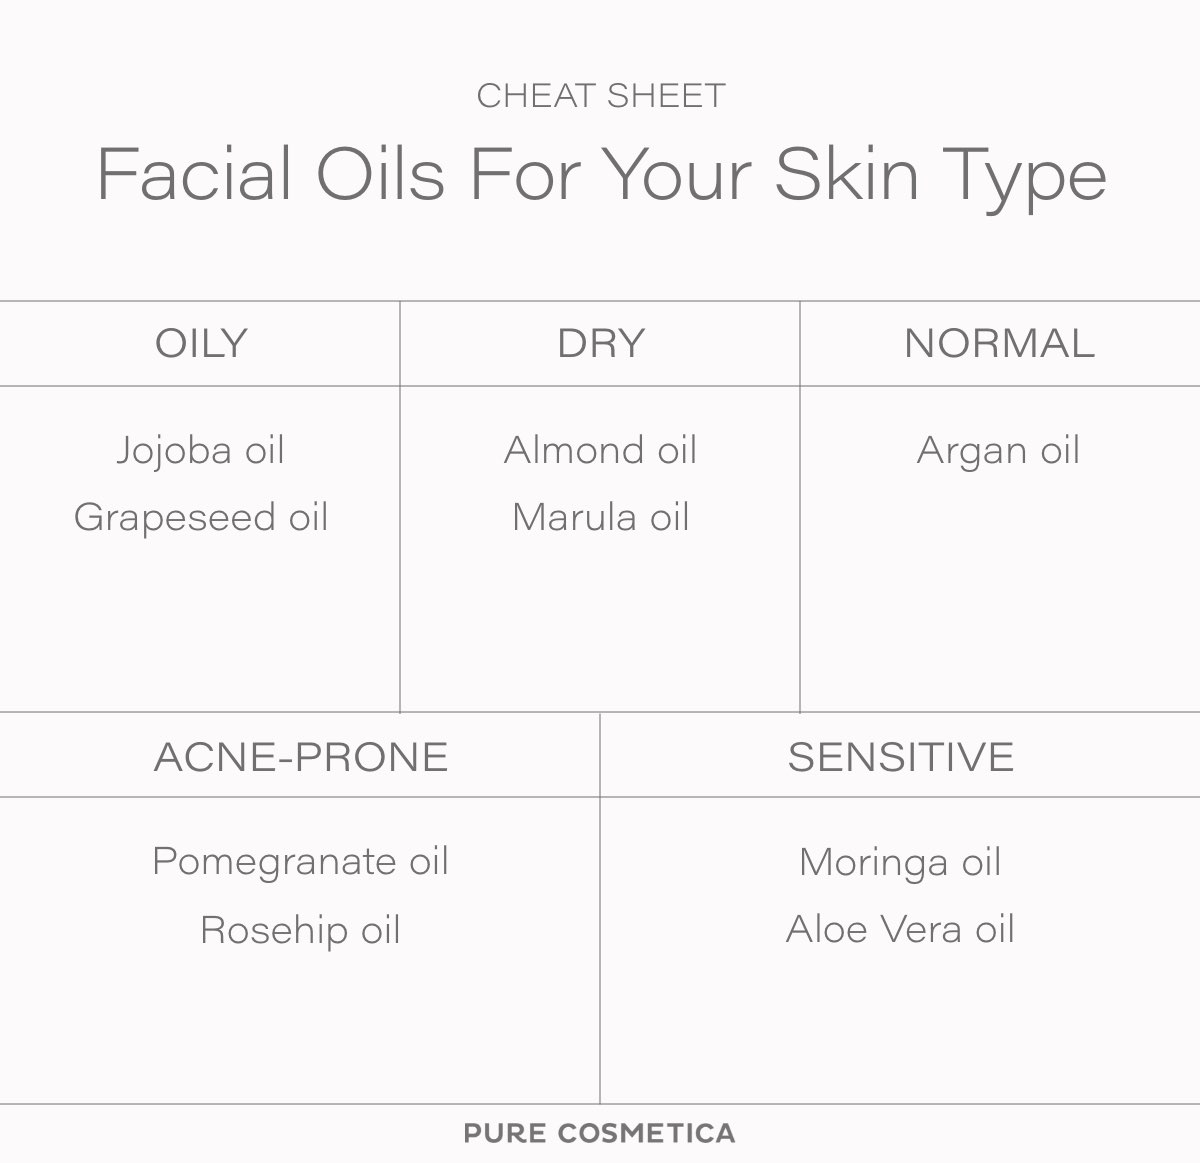 Face Oils for your skin type